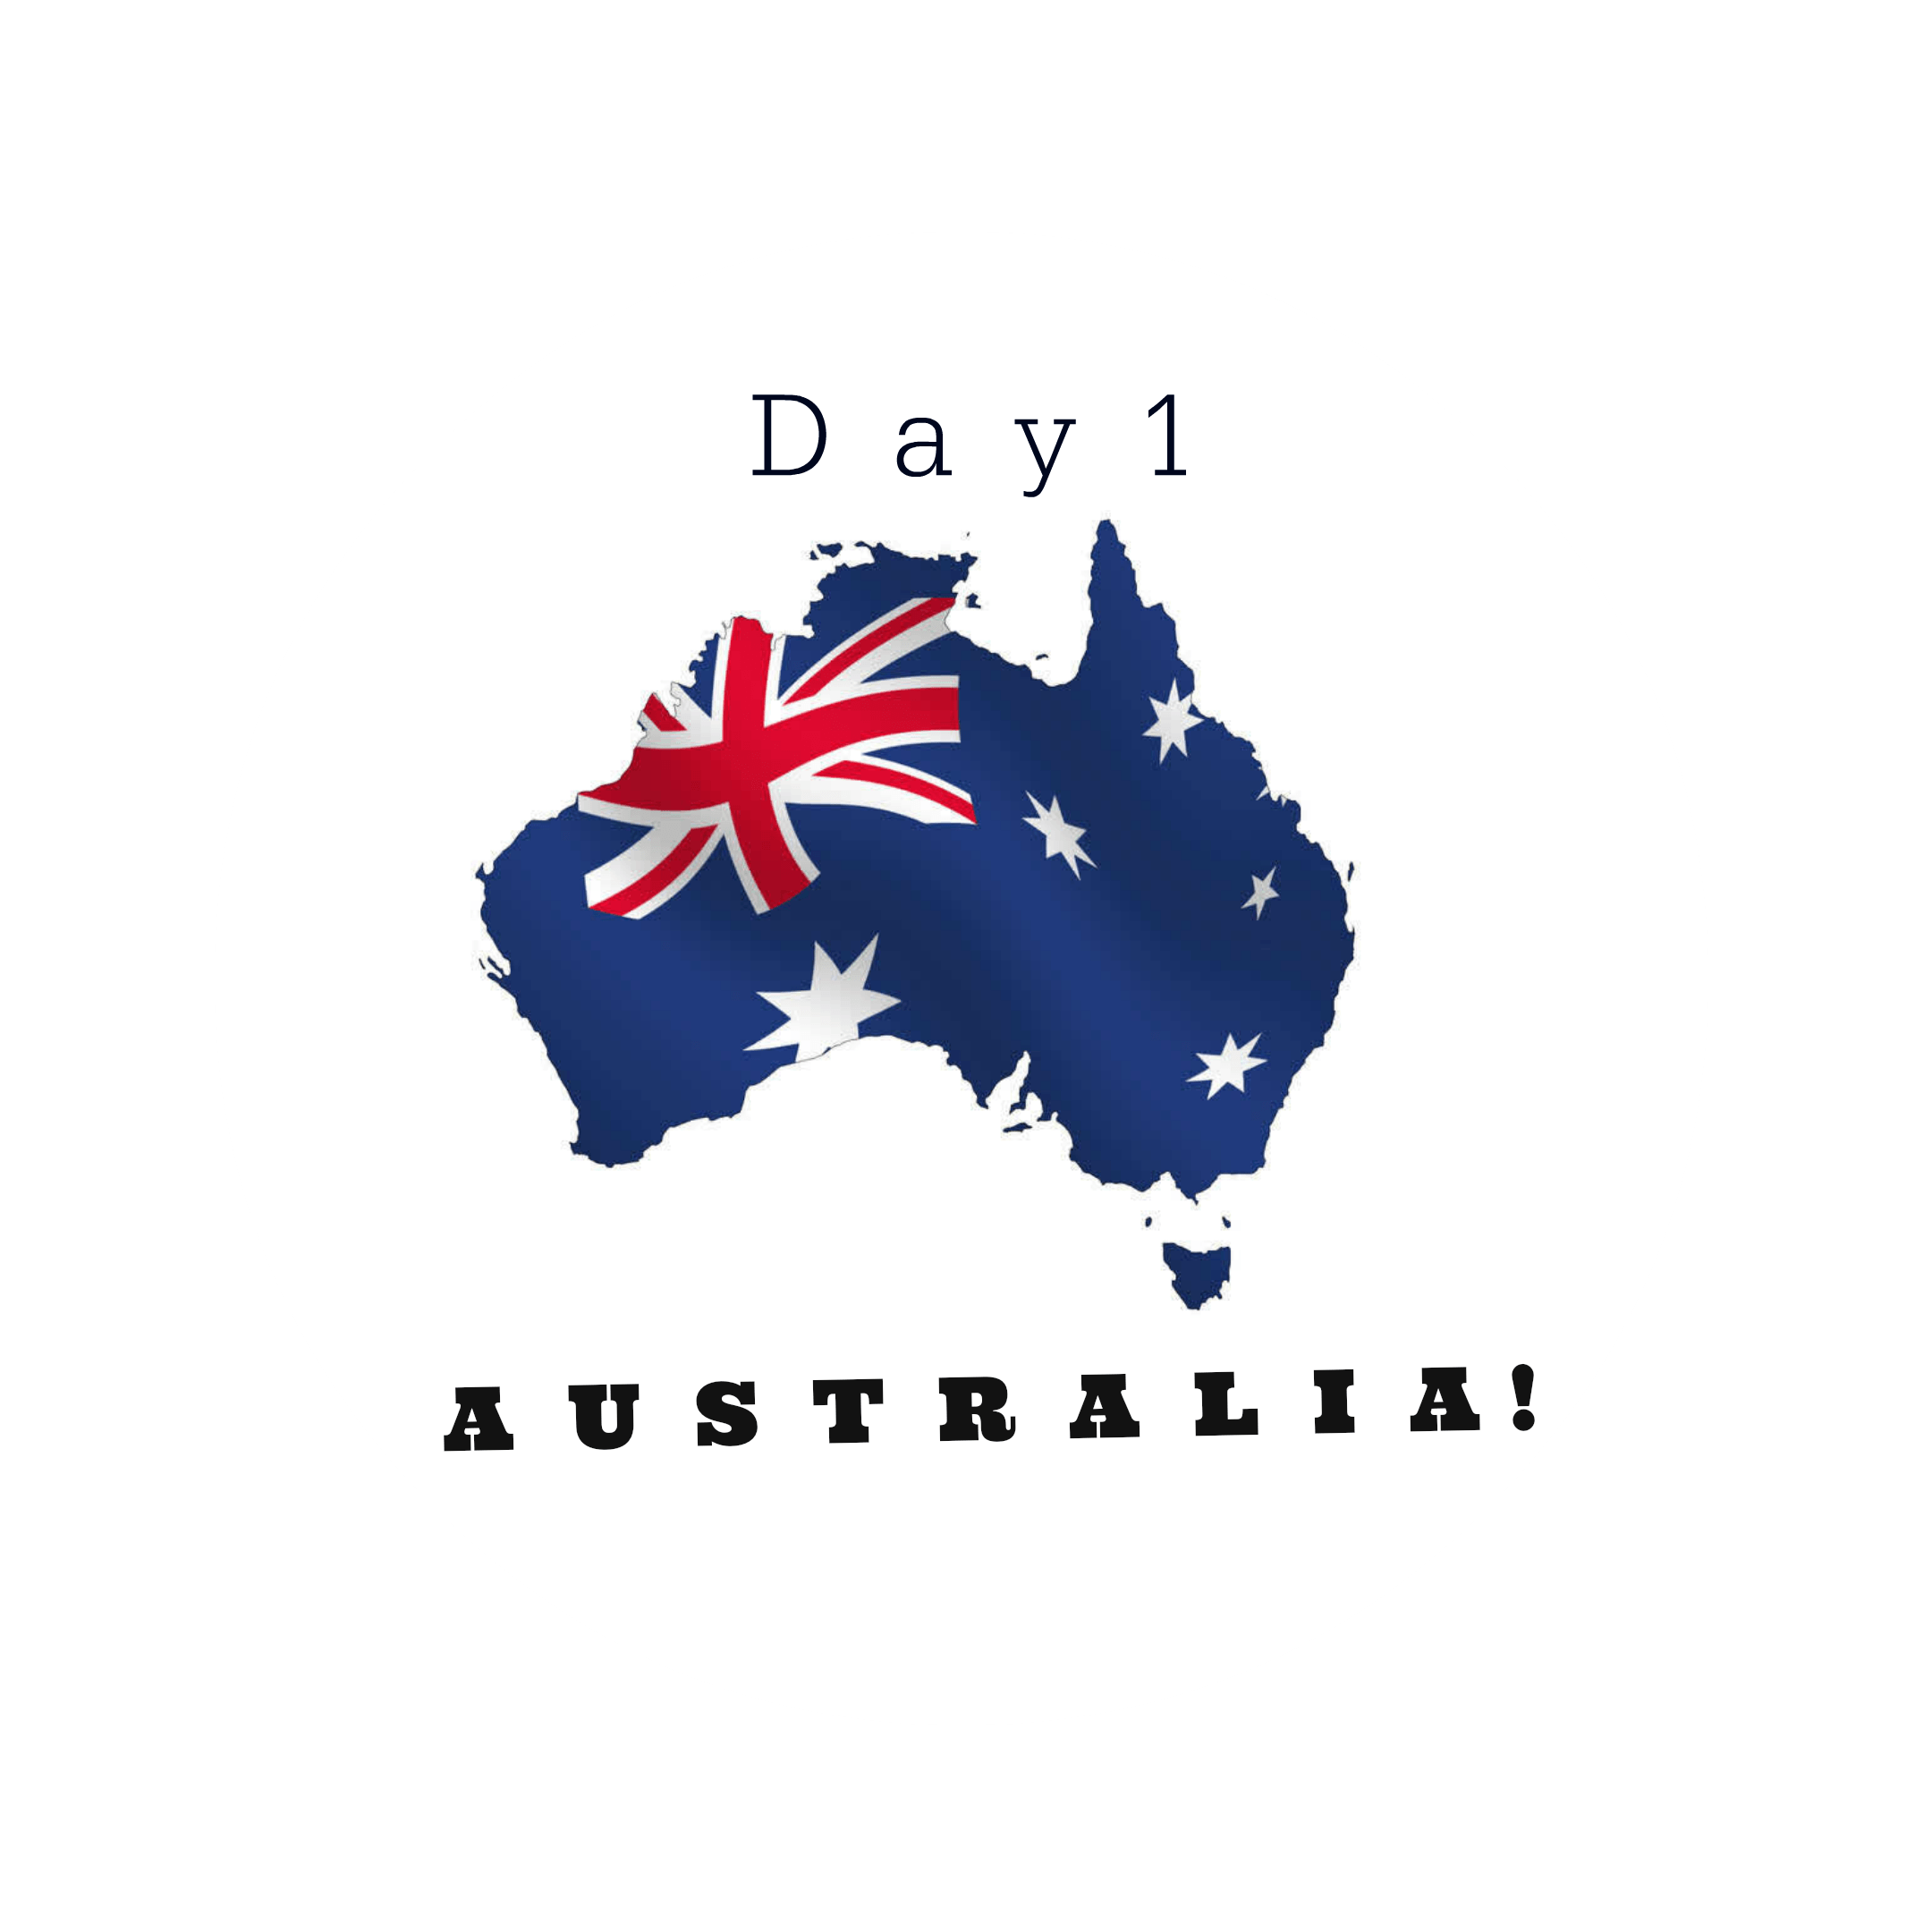 Funny Australian Logo - The first day of the challenge takes us to Australia with Rolf